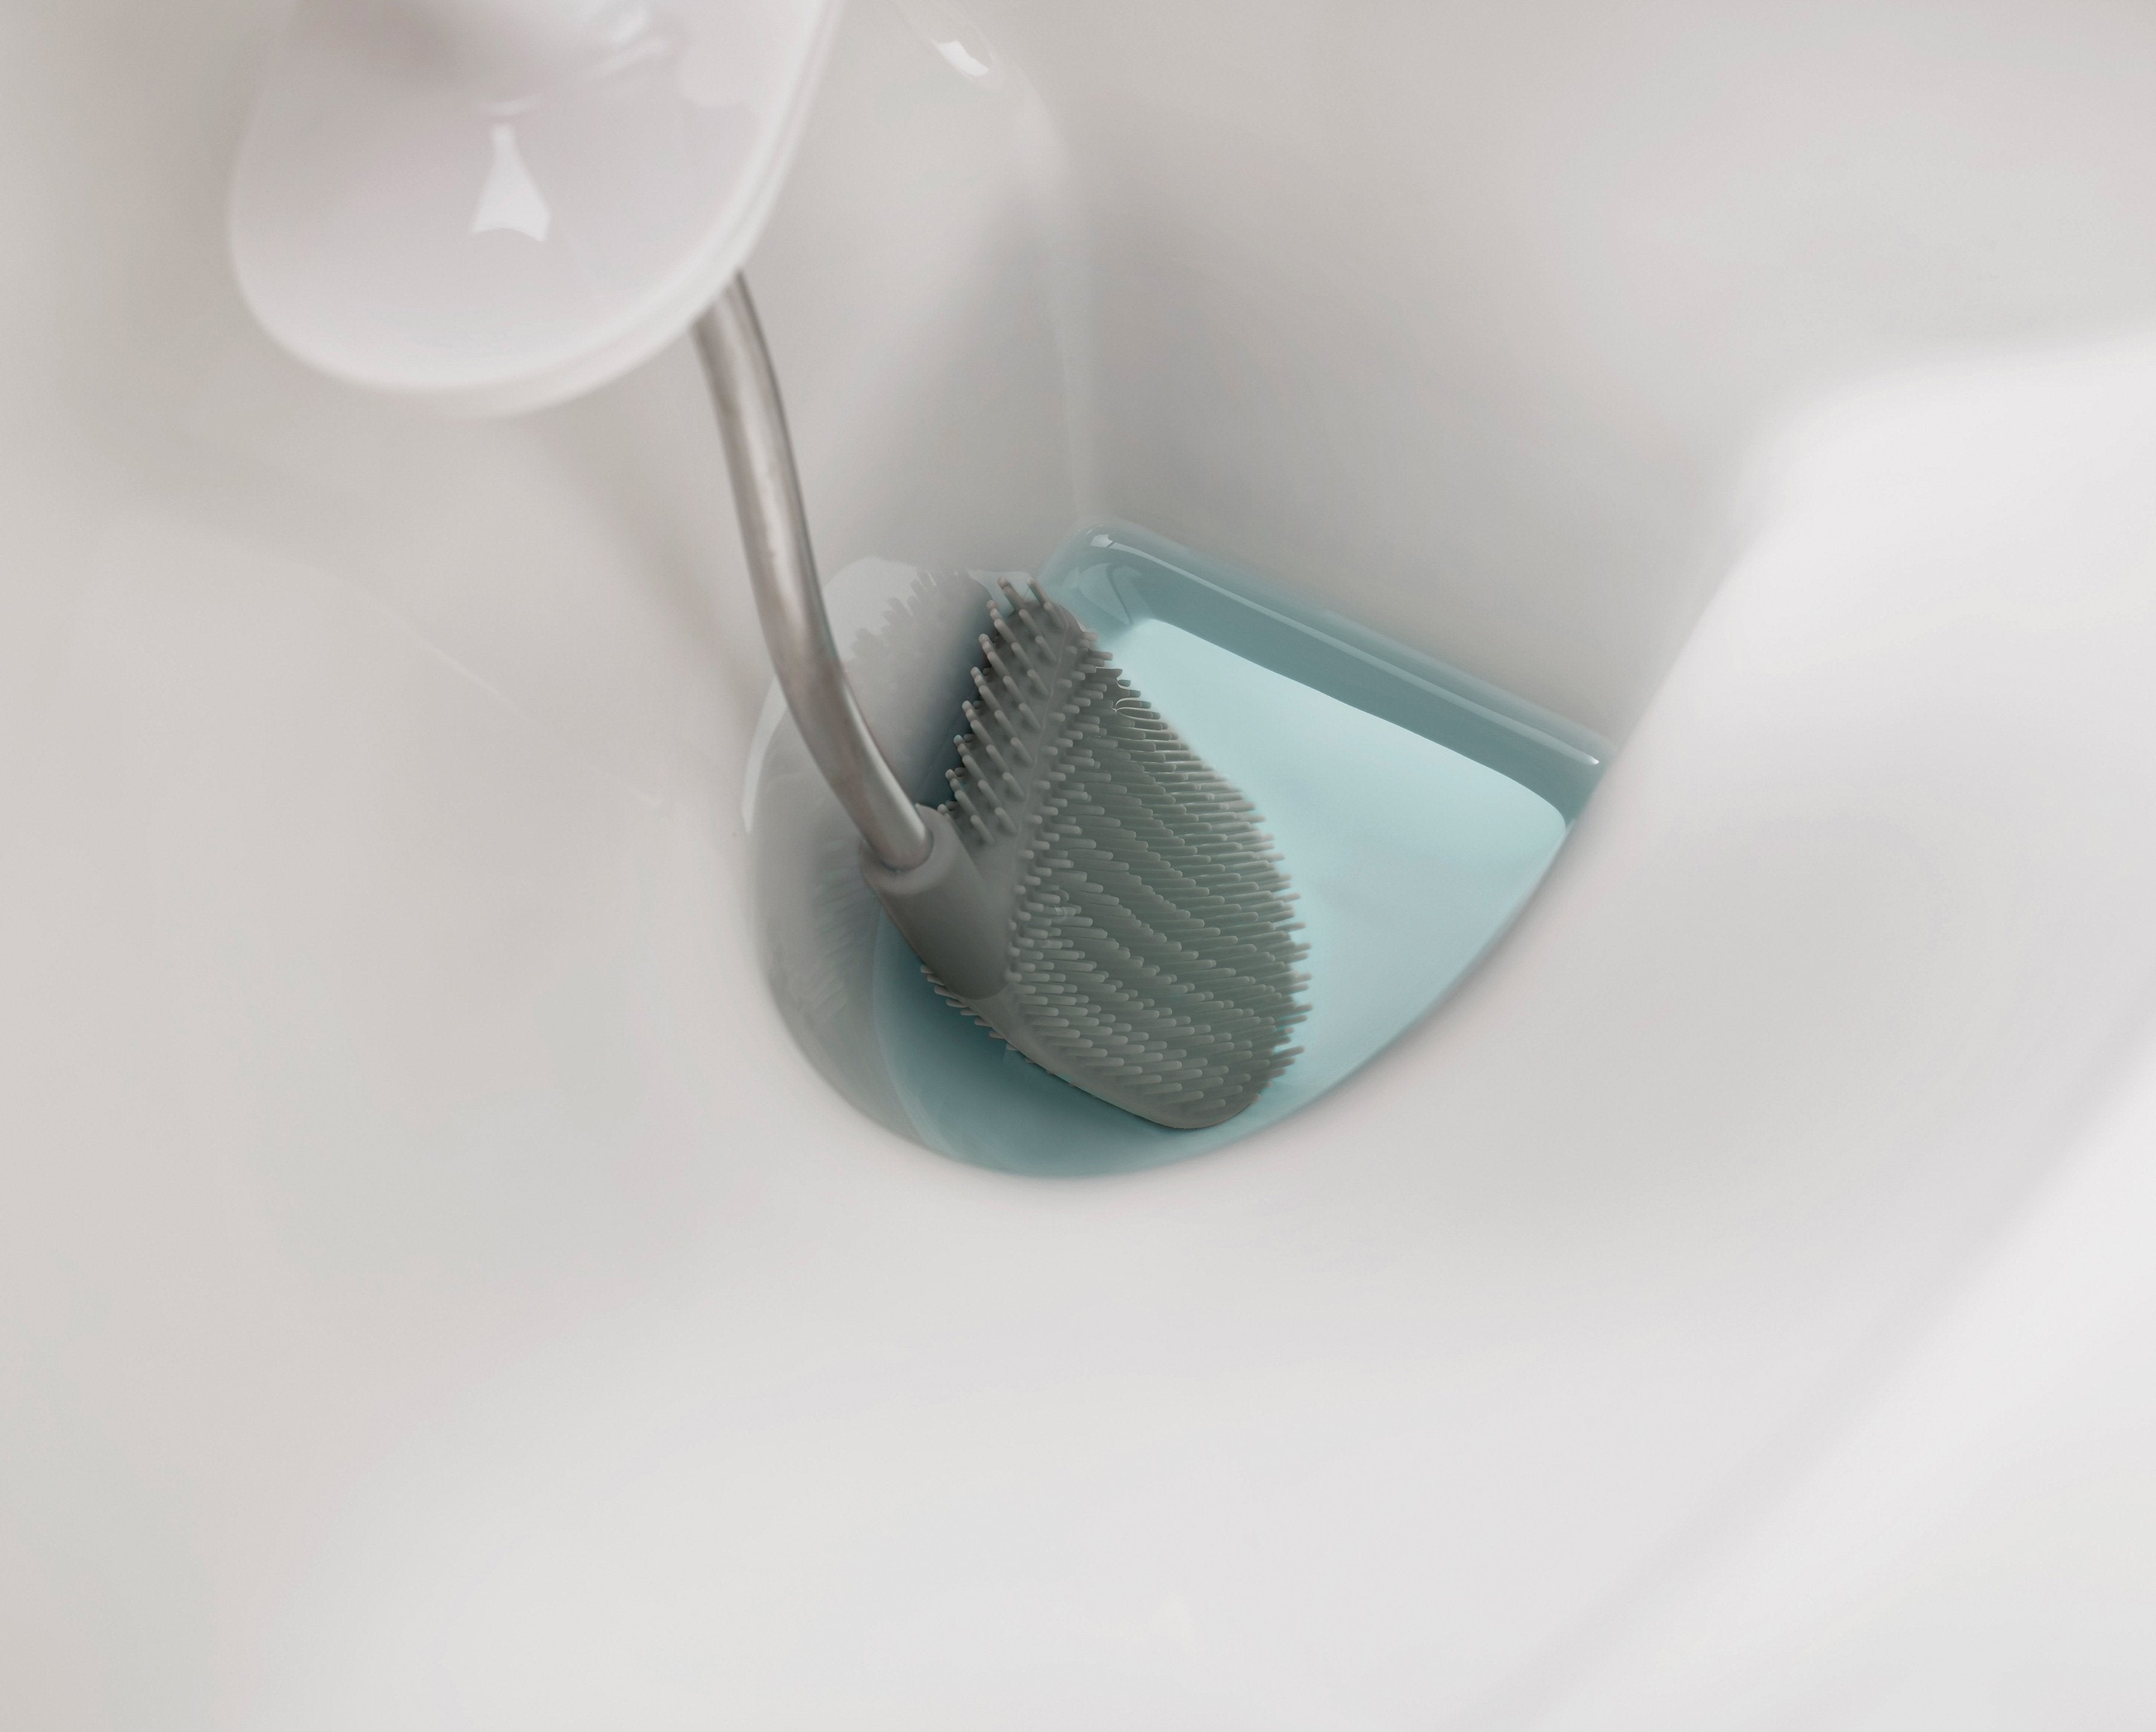 BEON.COM.AU  Our revolutionary Flex™ toilet brush has a unique D-shaped, flexible head with wide bristles to effectively and hygienically clean the toilet.  Flexible, D-shaped head reaches all areas, even under the rim Anti-drip: less dripping between cleaning and storing Anti-clog design: wide bristle spaci... Joseph Joseph at BEON.COM.AU